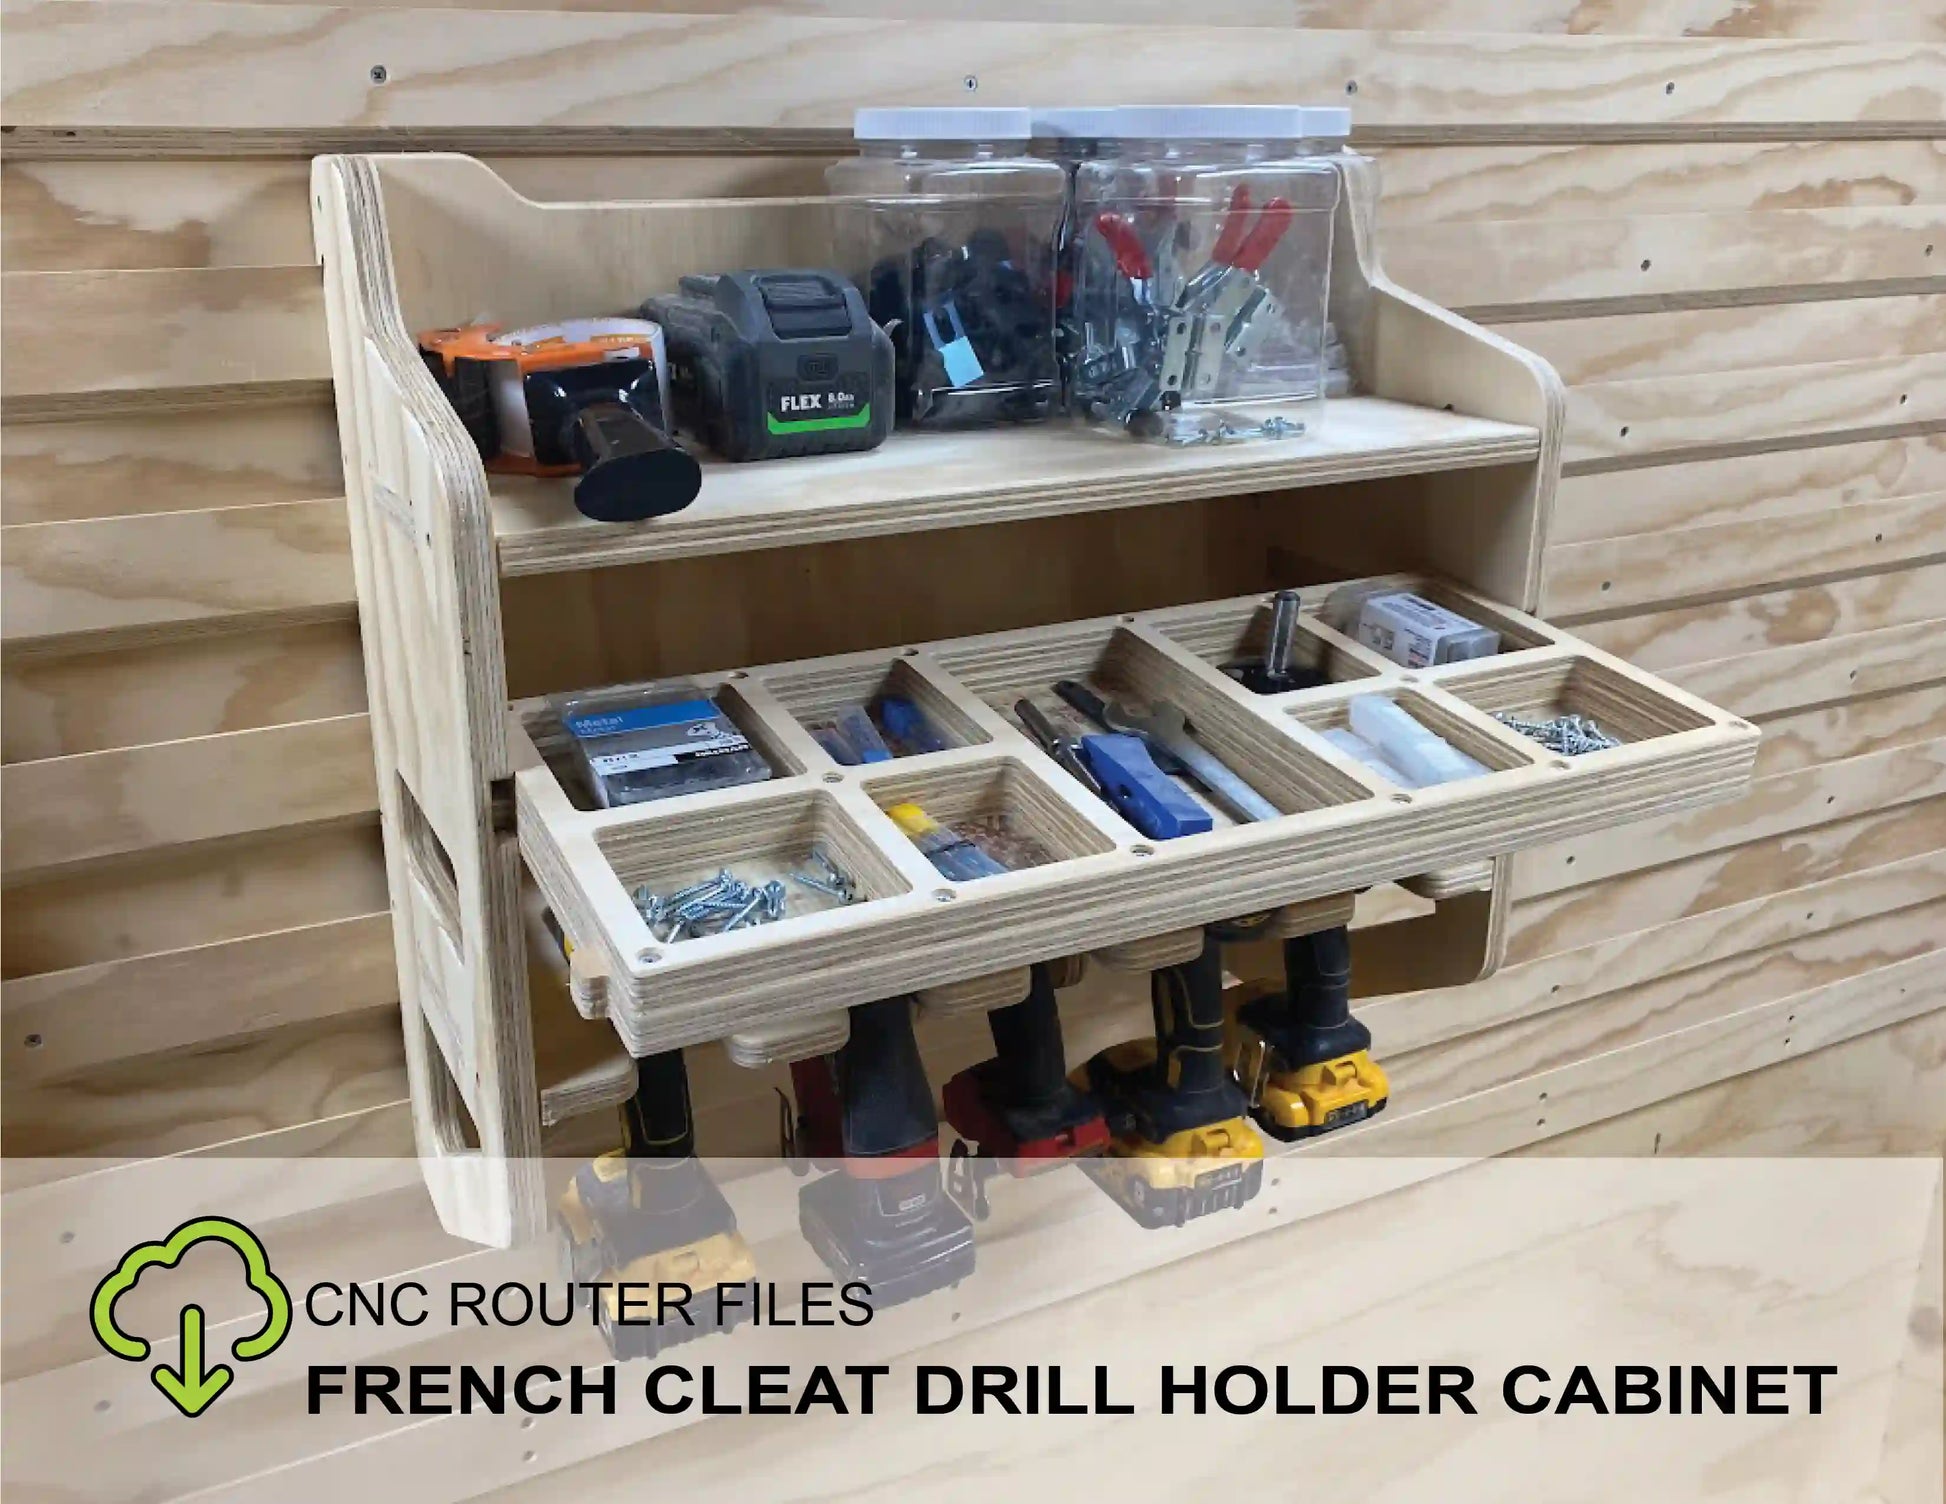 french cleat drill storage shelf cabinet with sliding tool bin for organizing screws tools wrenches router bits that mounts to a french cleat organizational storage wall made from plywood